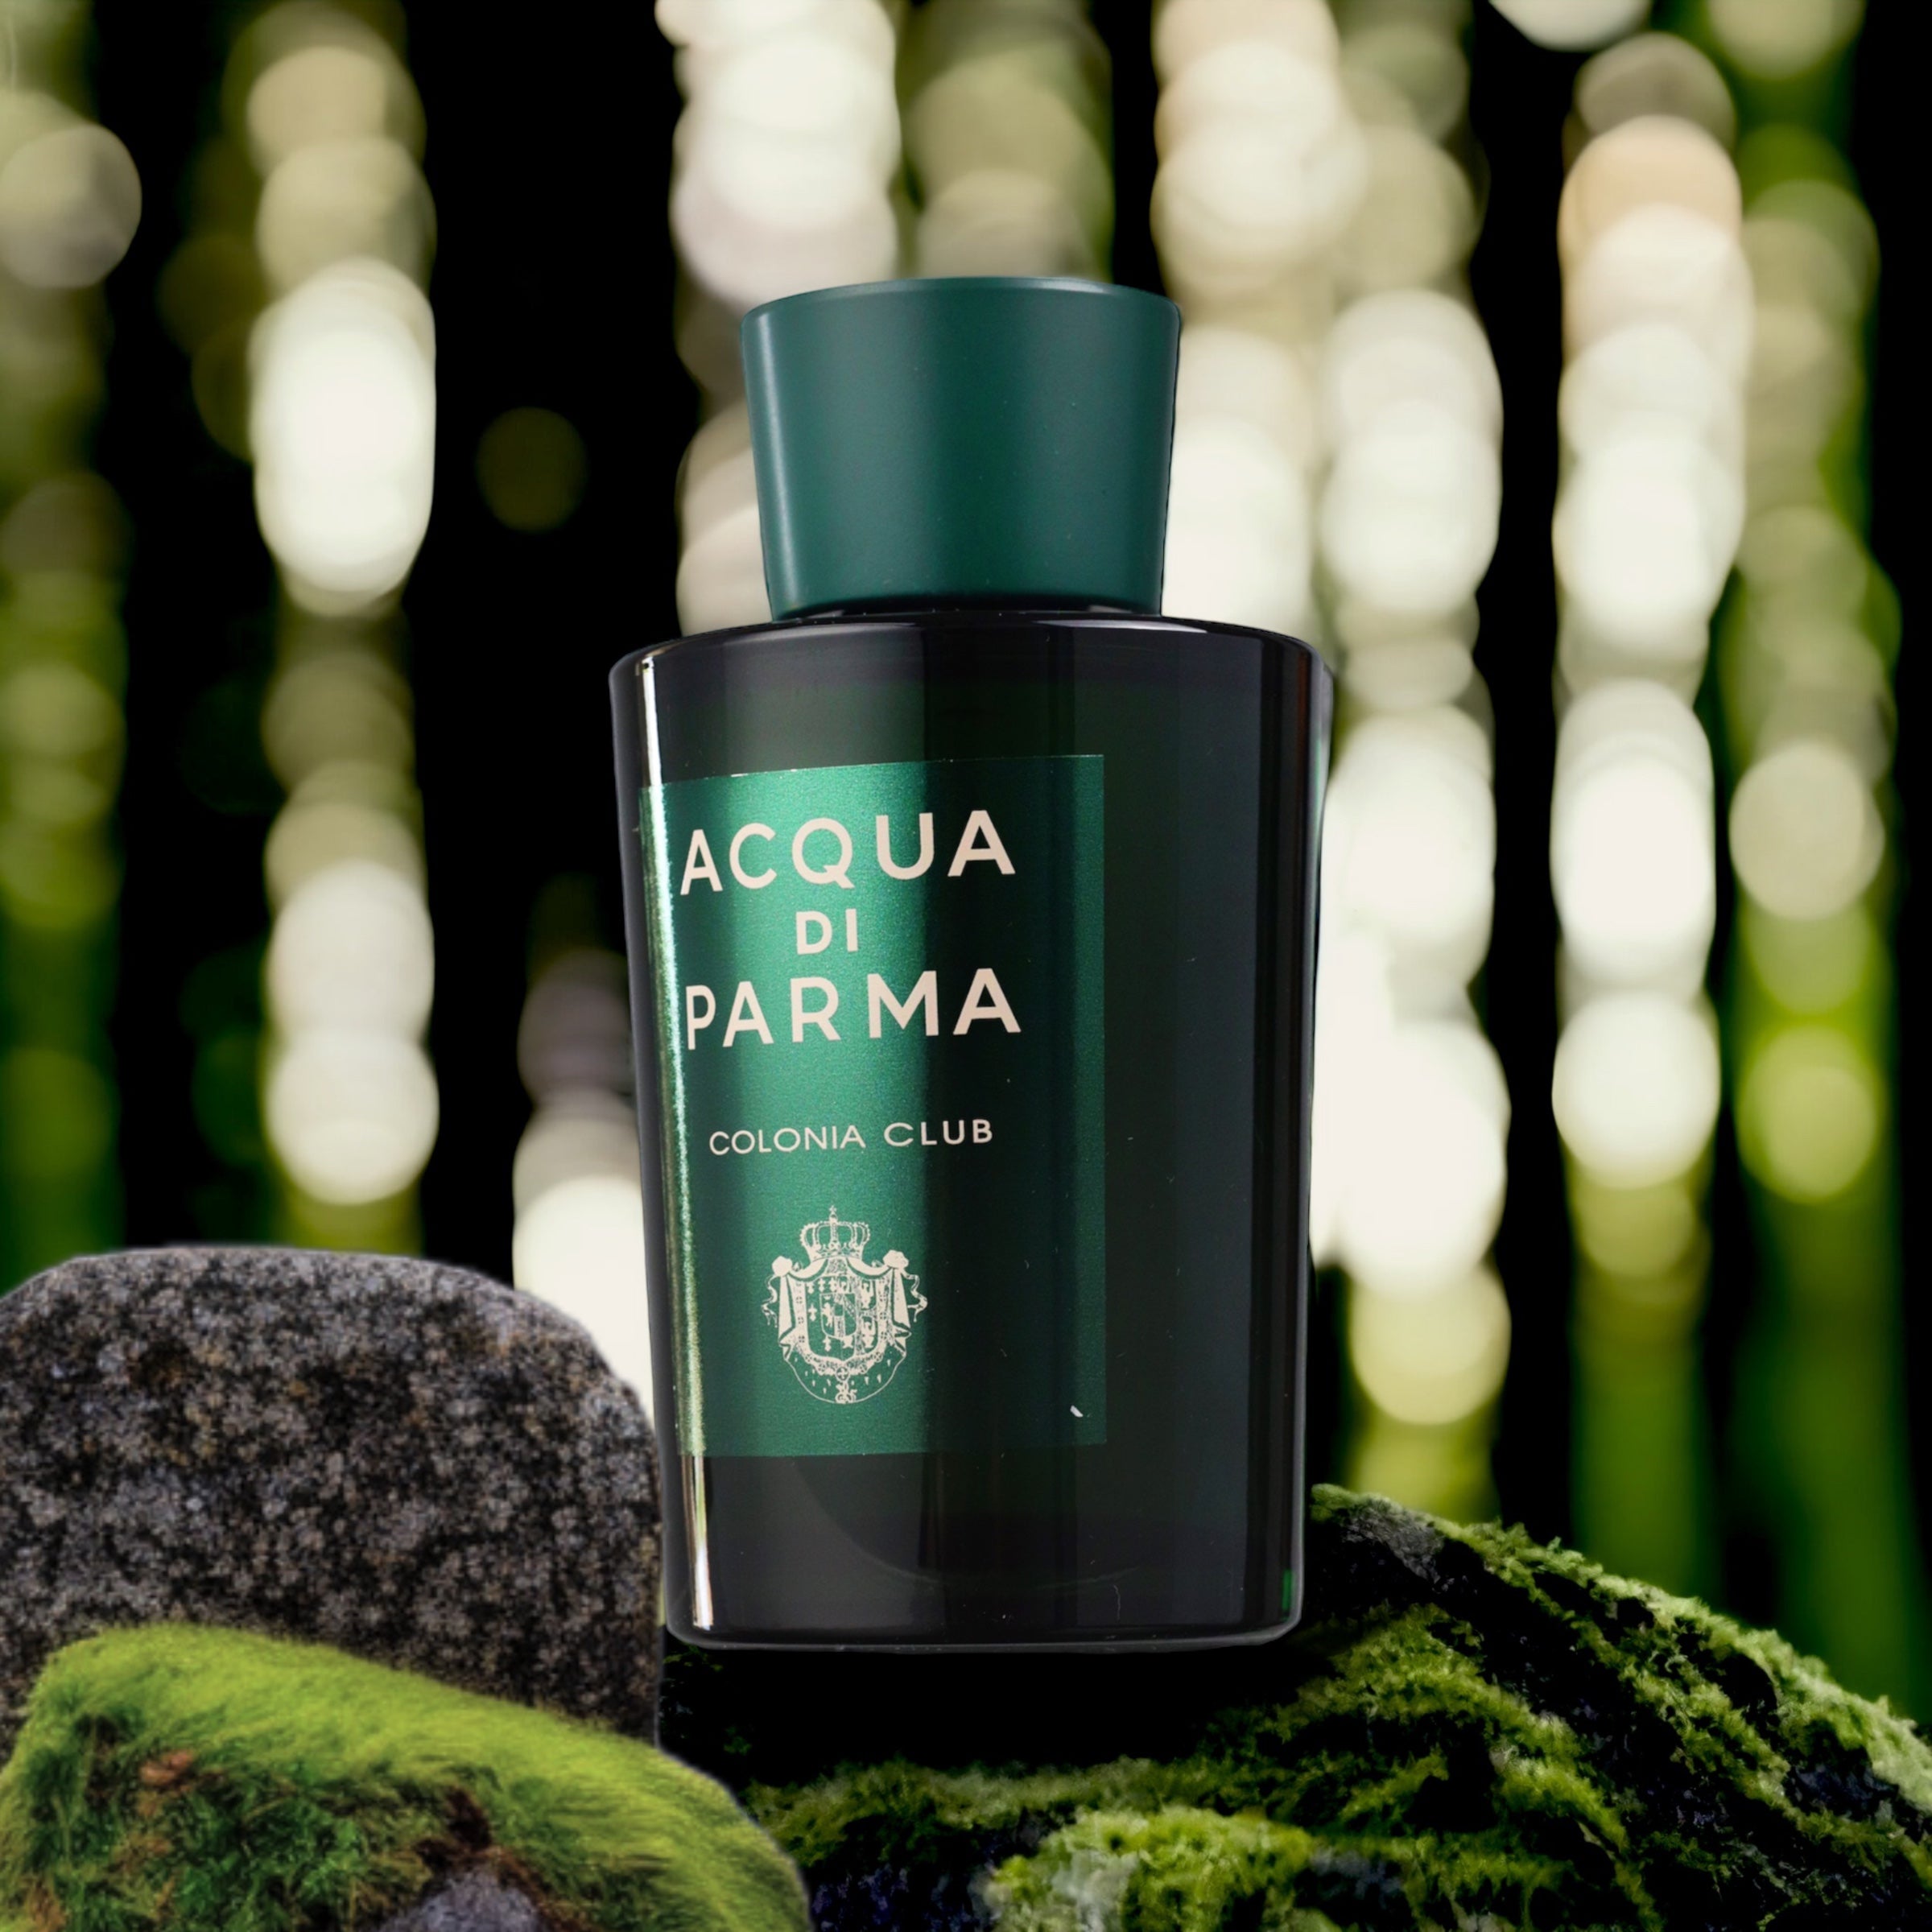 Perfume.com on X: Find your new #signaturescent in Acqua Di Parma's  Colonia Club Cologne. This complex blend offers a #modern twist on a  classic musk fragrance and wears well whether you're at